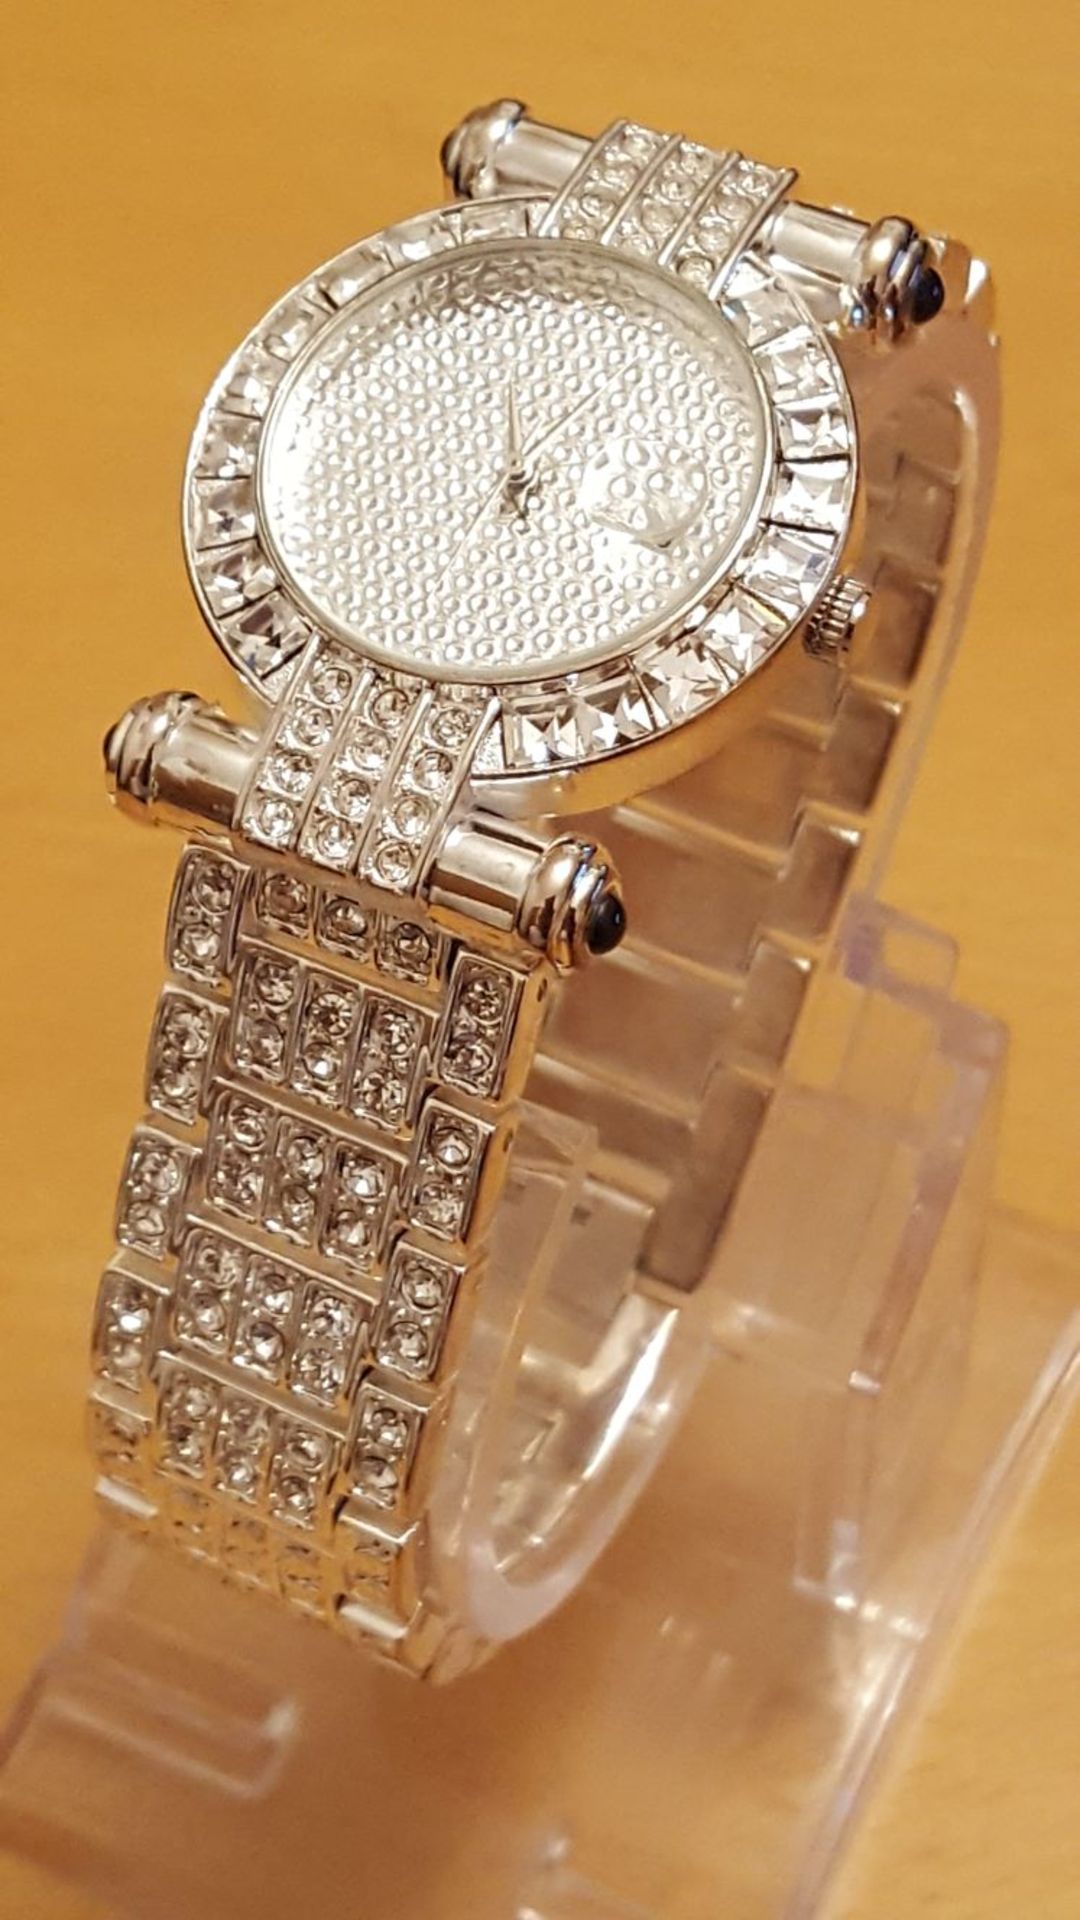 BRAND NEW LADIES SILVER FACE, SILVER DIAMENTE WATCH BY SOFTECH - RRP £149